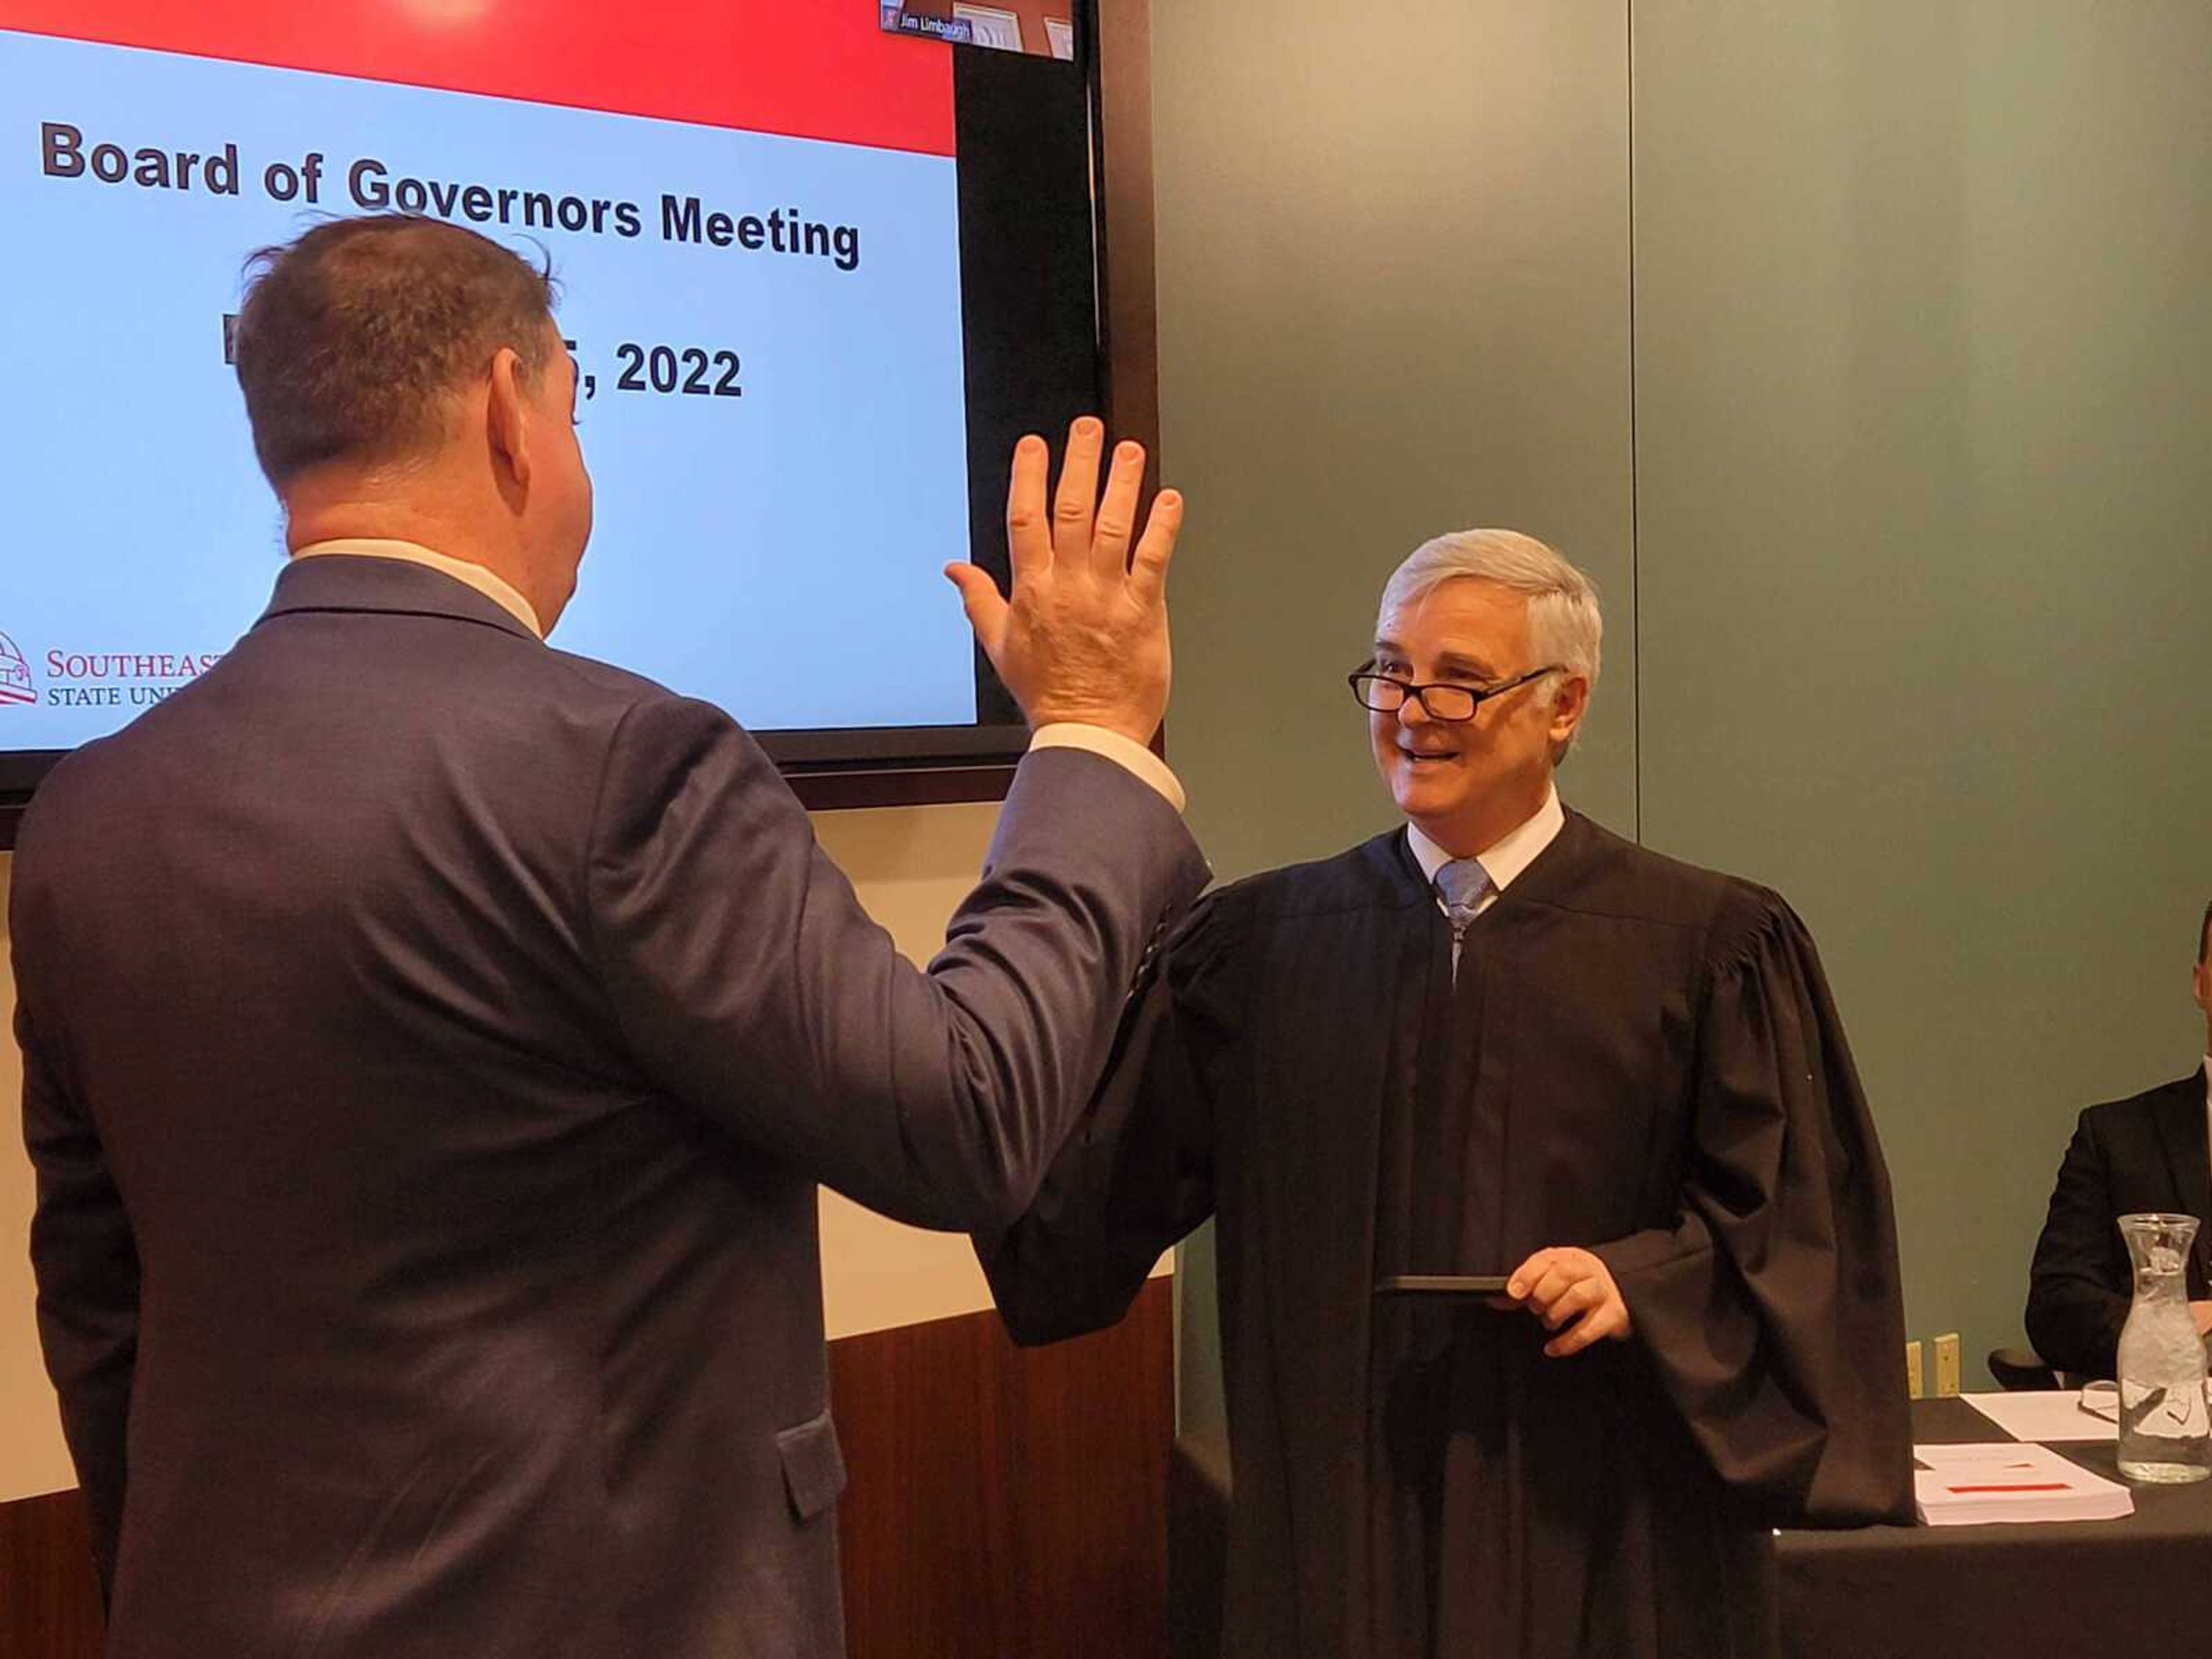 Governor David Martin being sworn in onto the board by Judge Robert Mayer on Feb. 25.